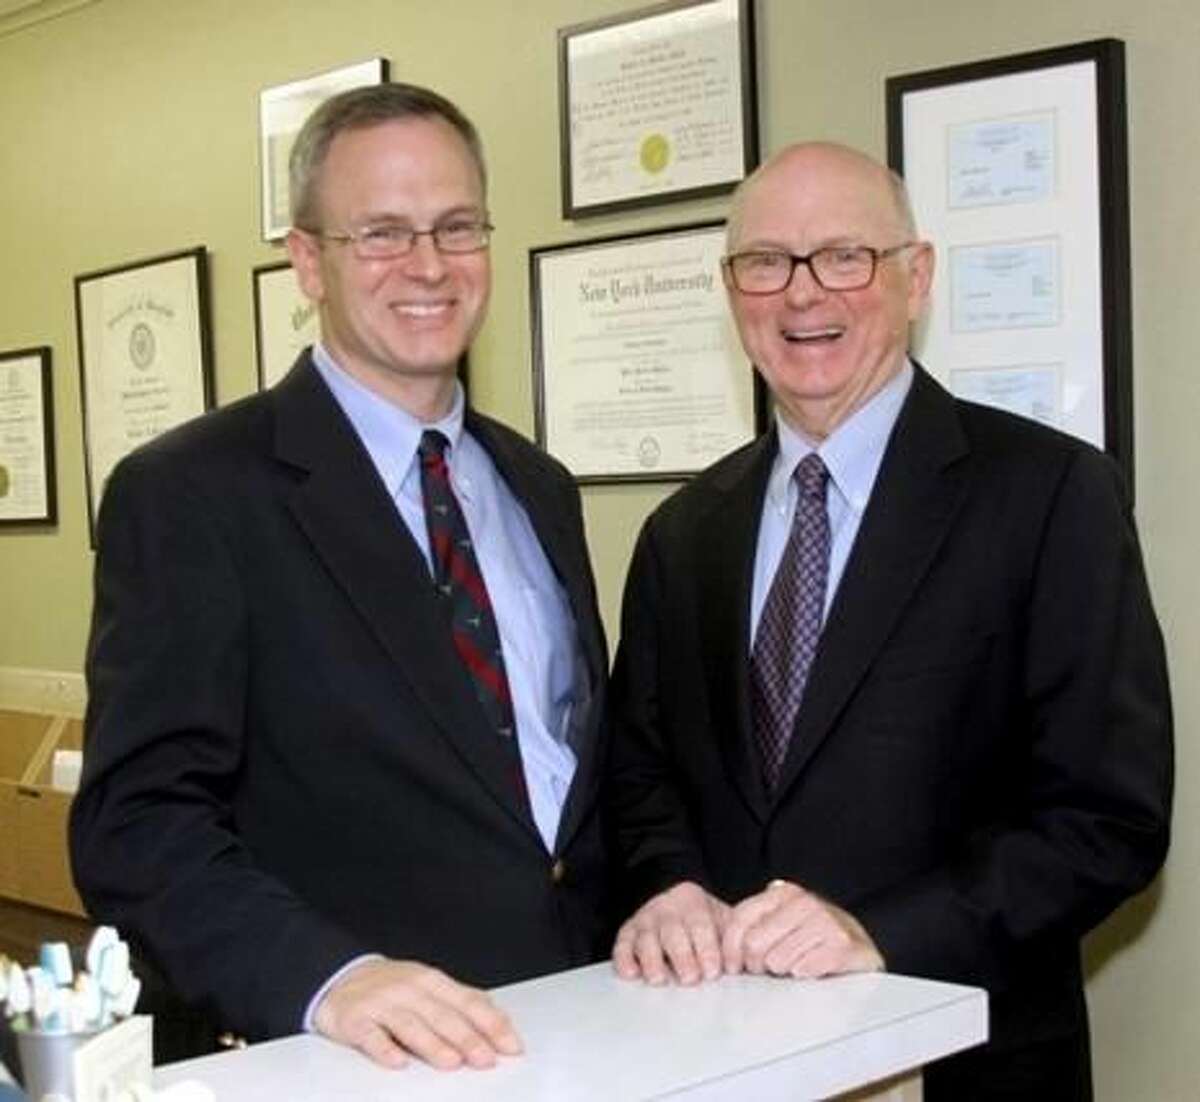 Left, Dr. John Mullen, an orthopedic surgeon, and his father, Dr. Robert Mullen, a dentist in New Milford. Photo by Walter Kidd.